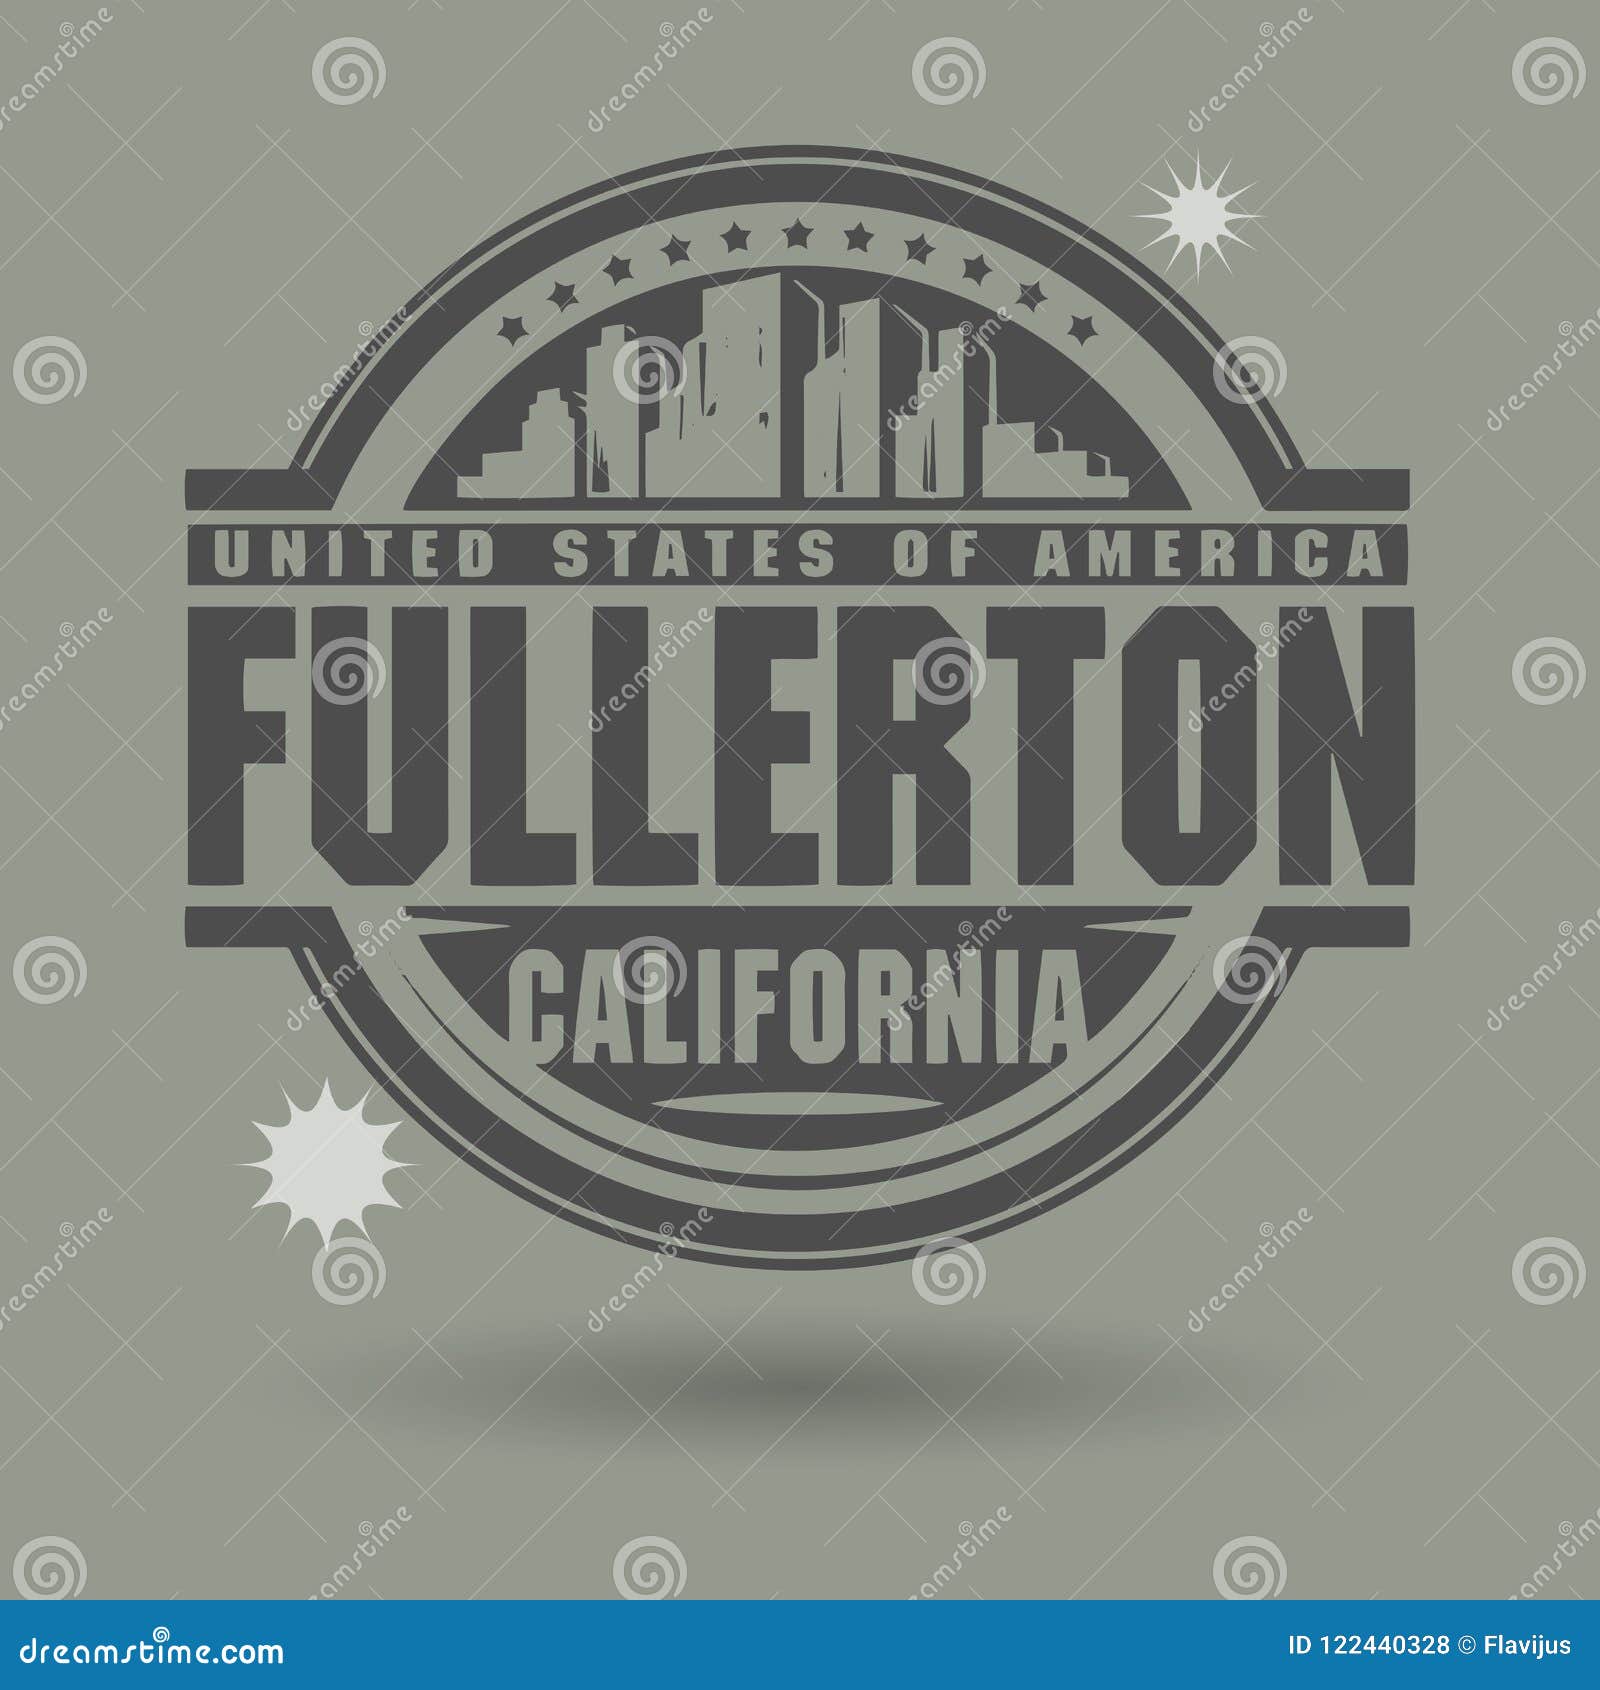 stamp or label with text fullerton, california inside